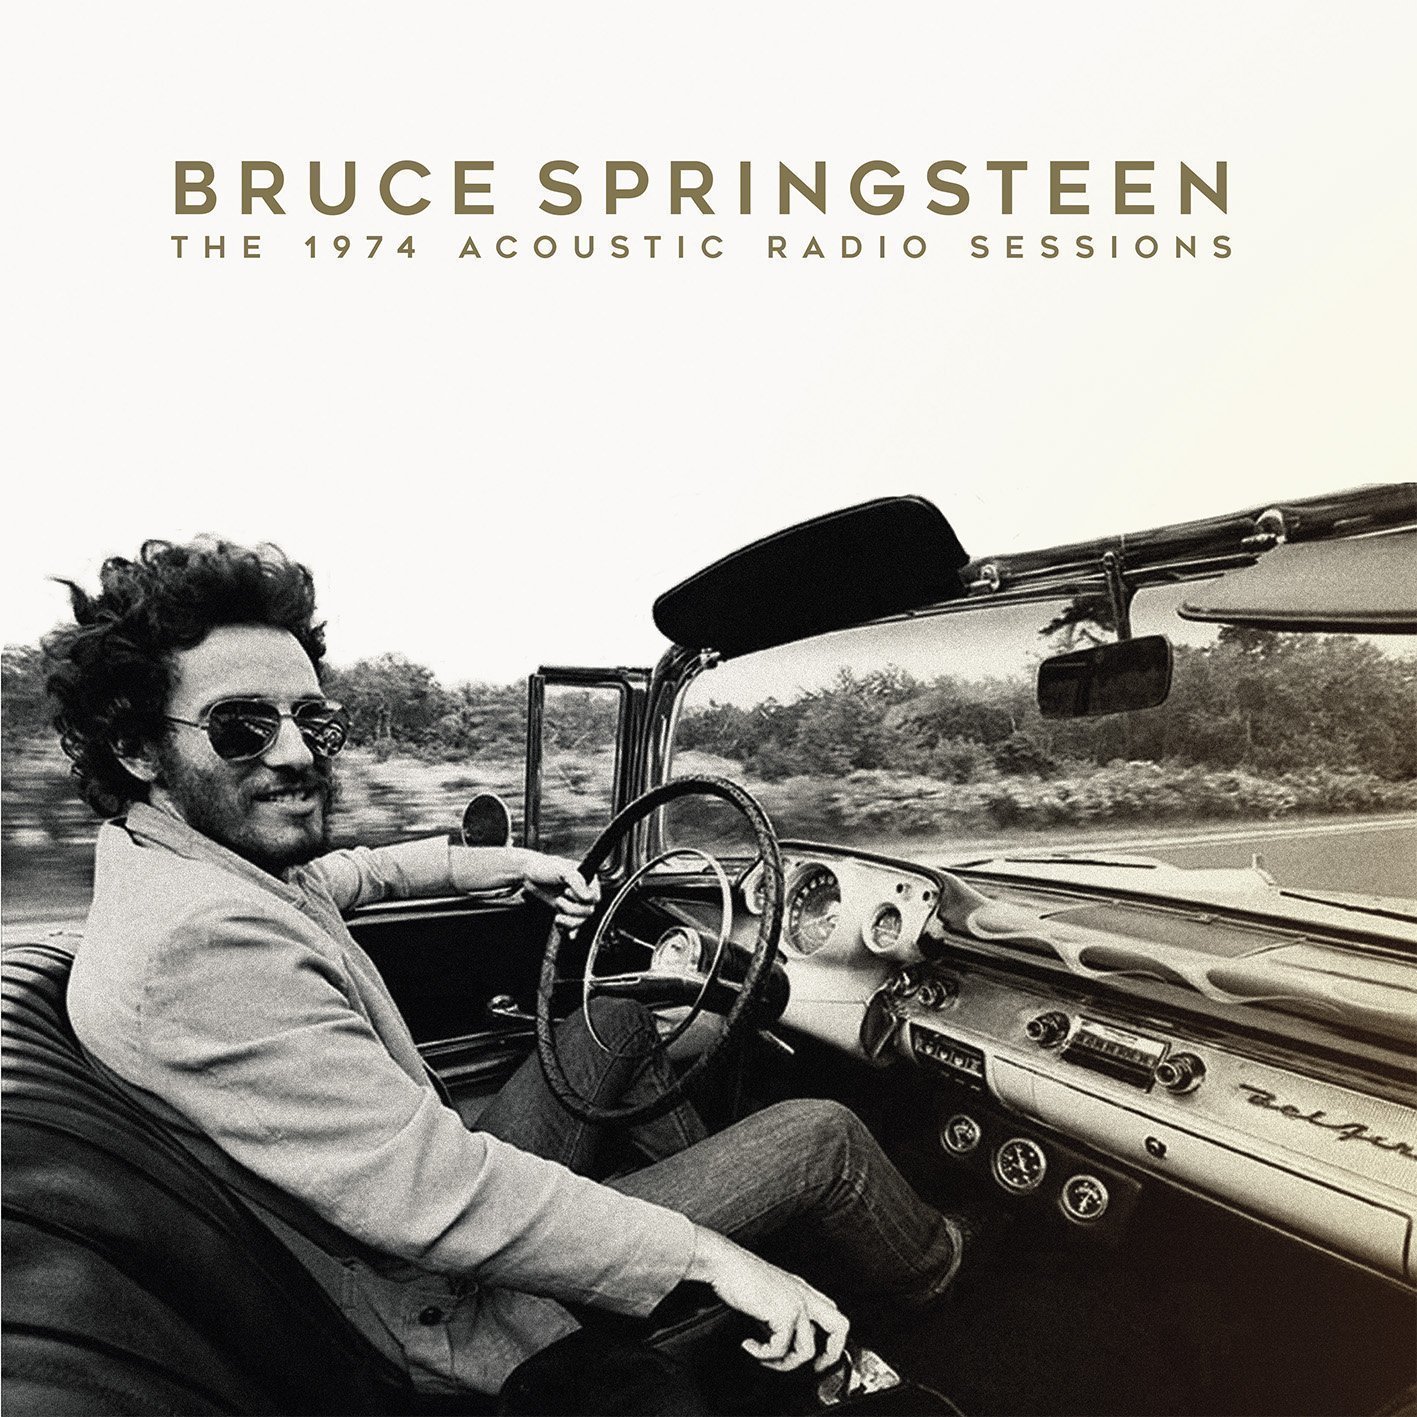 Płyta winylowa Bruce Springsteen - The 1974 Acoustic Radio Sessions (2 LP)